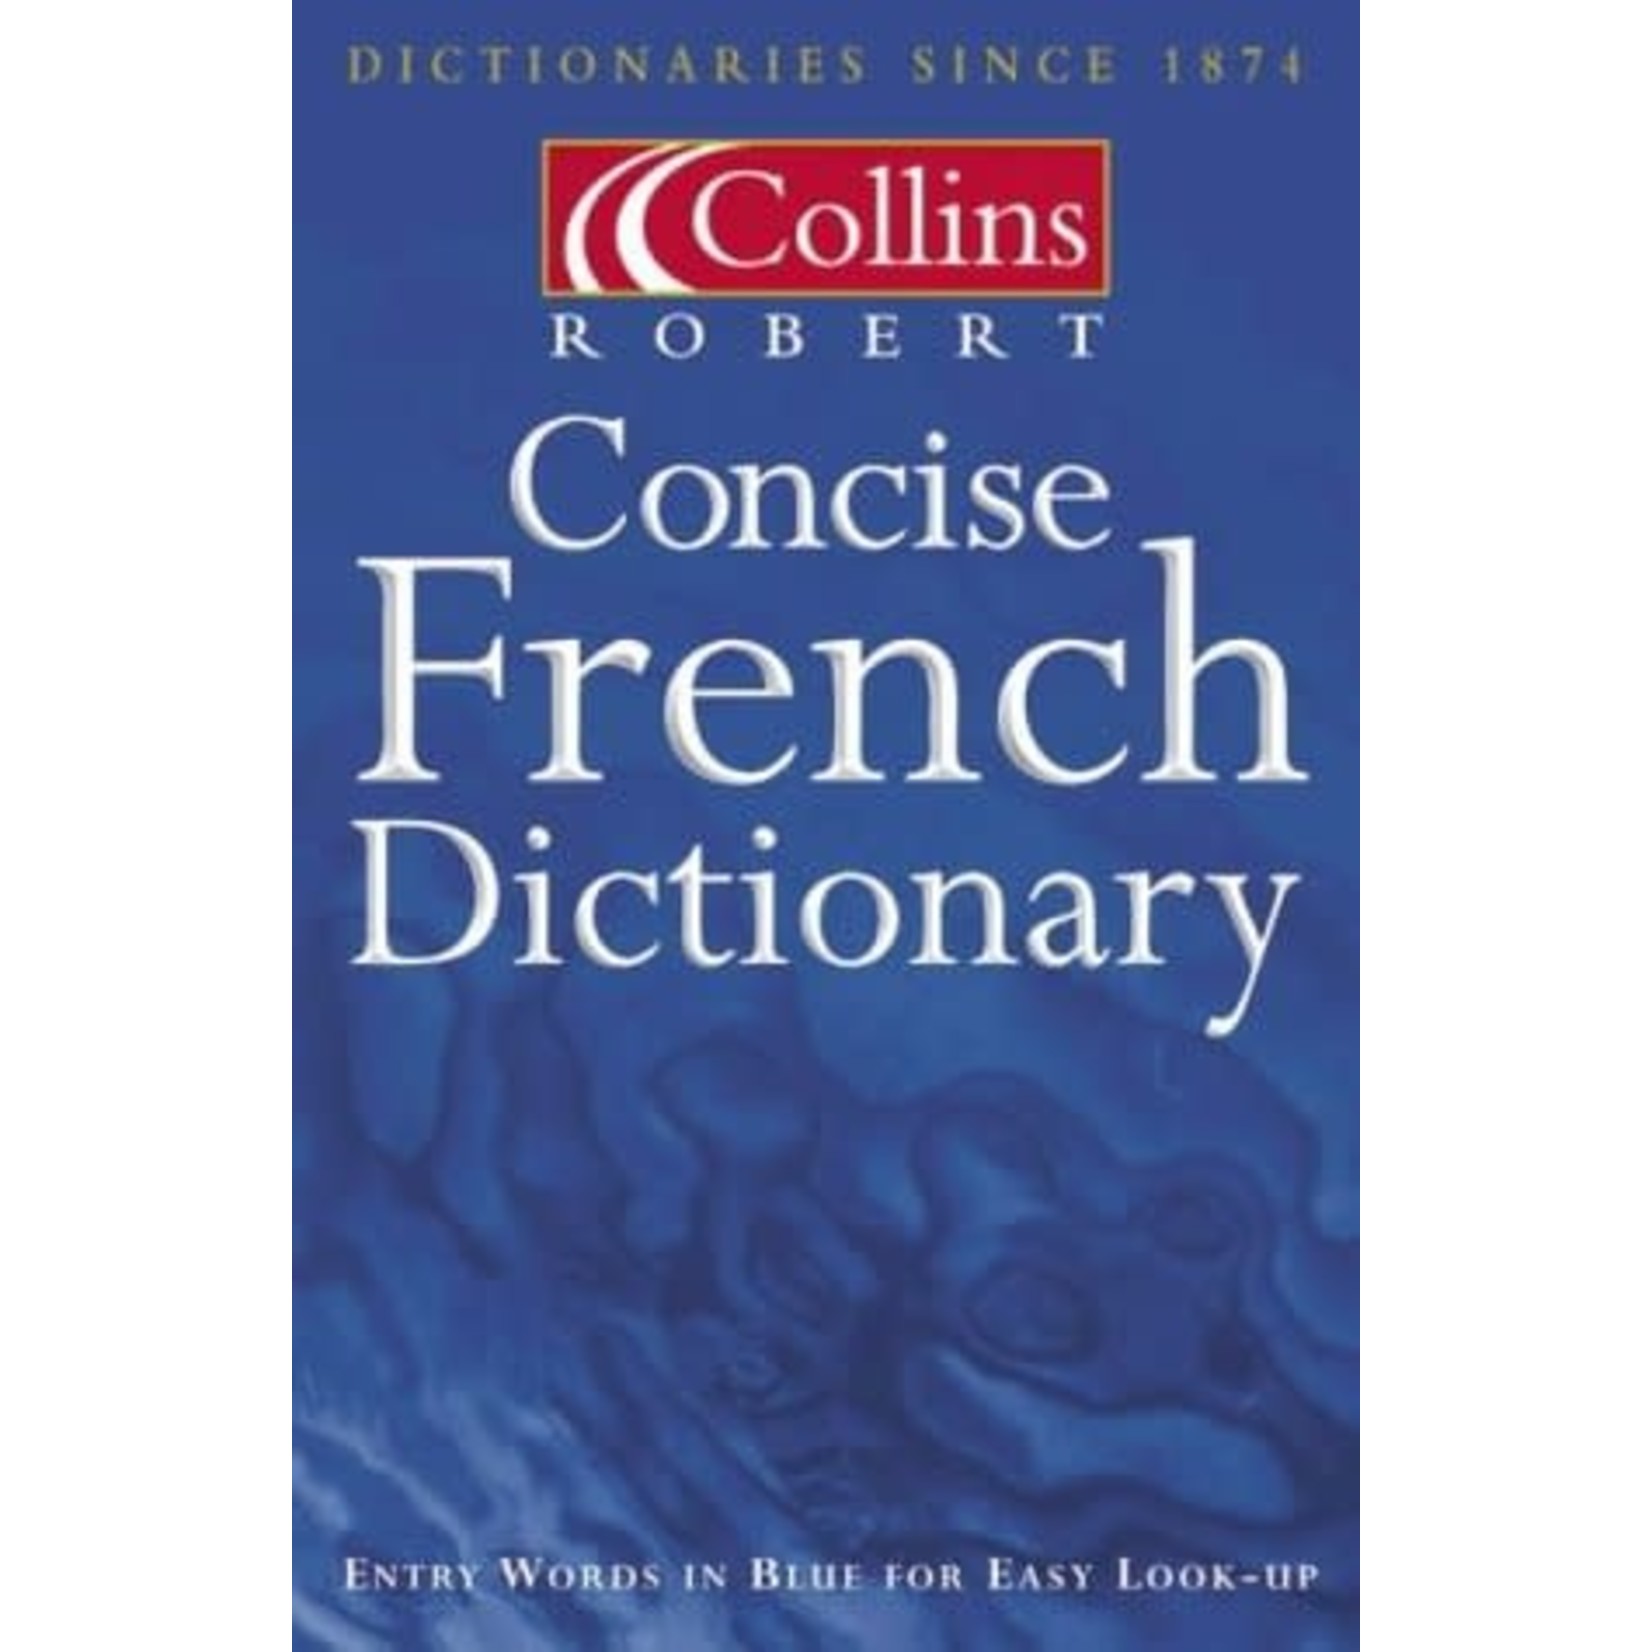 Collins Robert - Concise French Dictionary